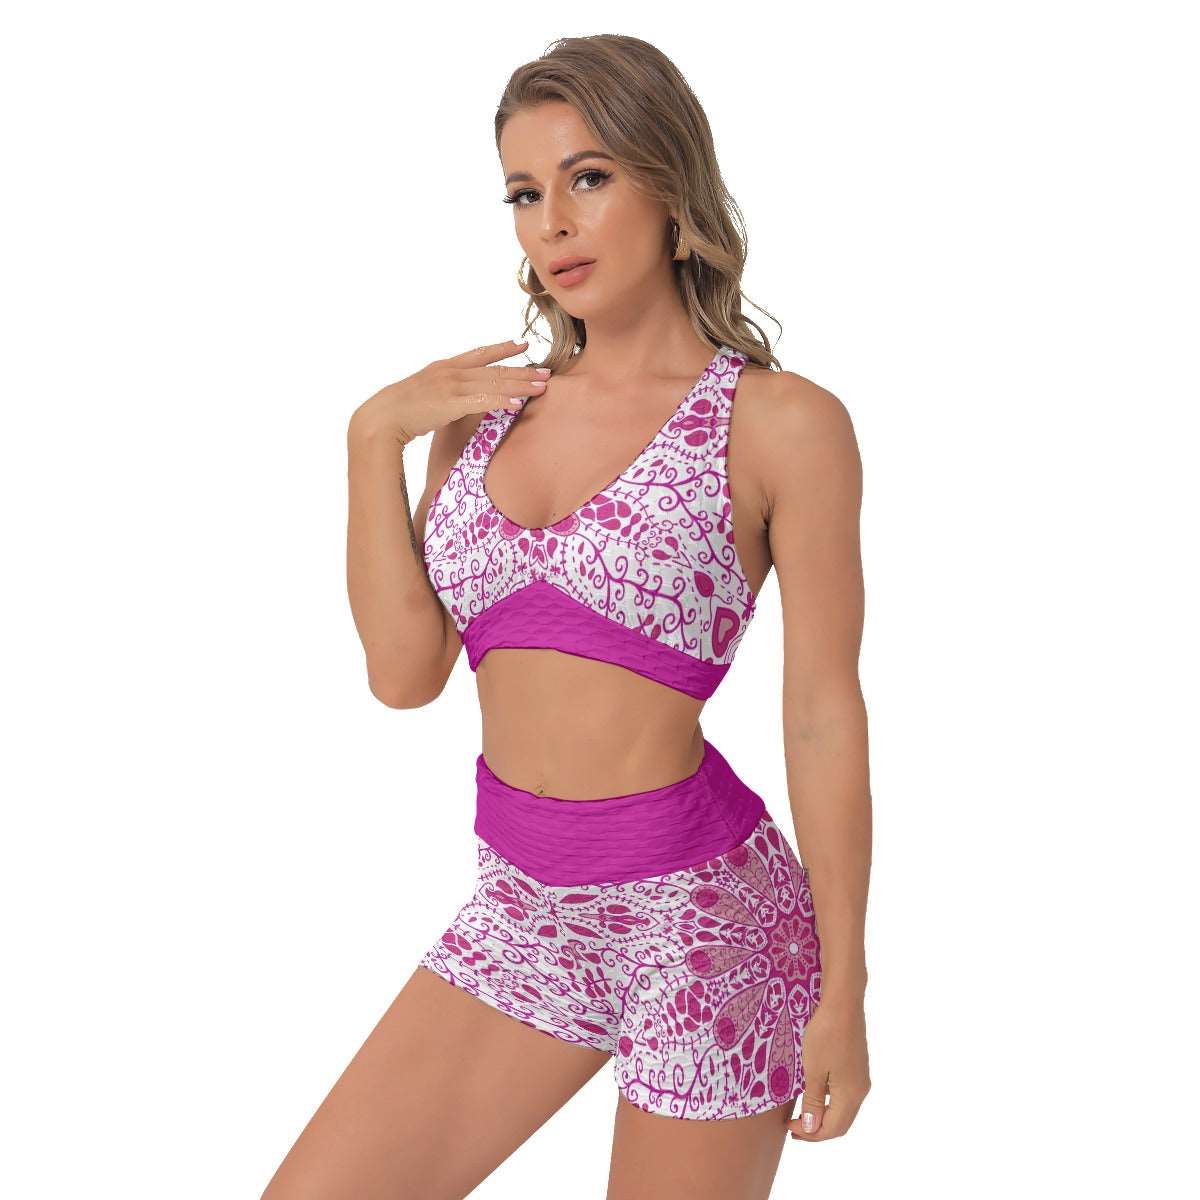 Berry Lace Sports Bra and Shorts Set - AnimePhysique